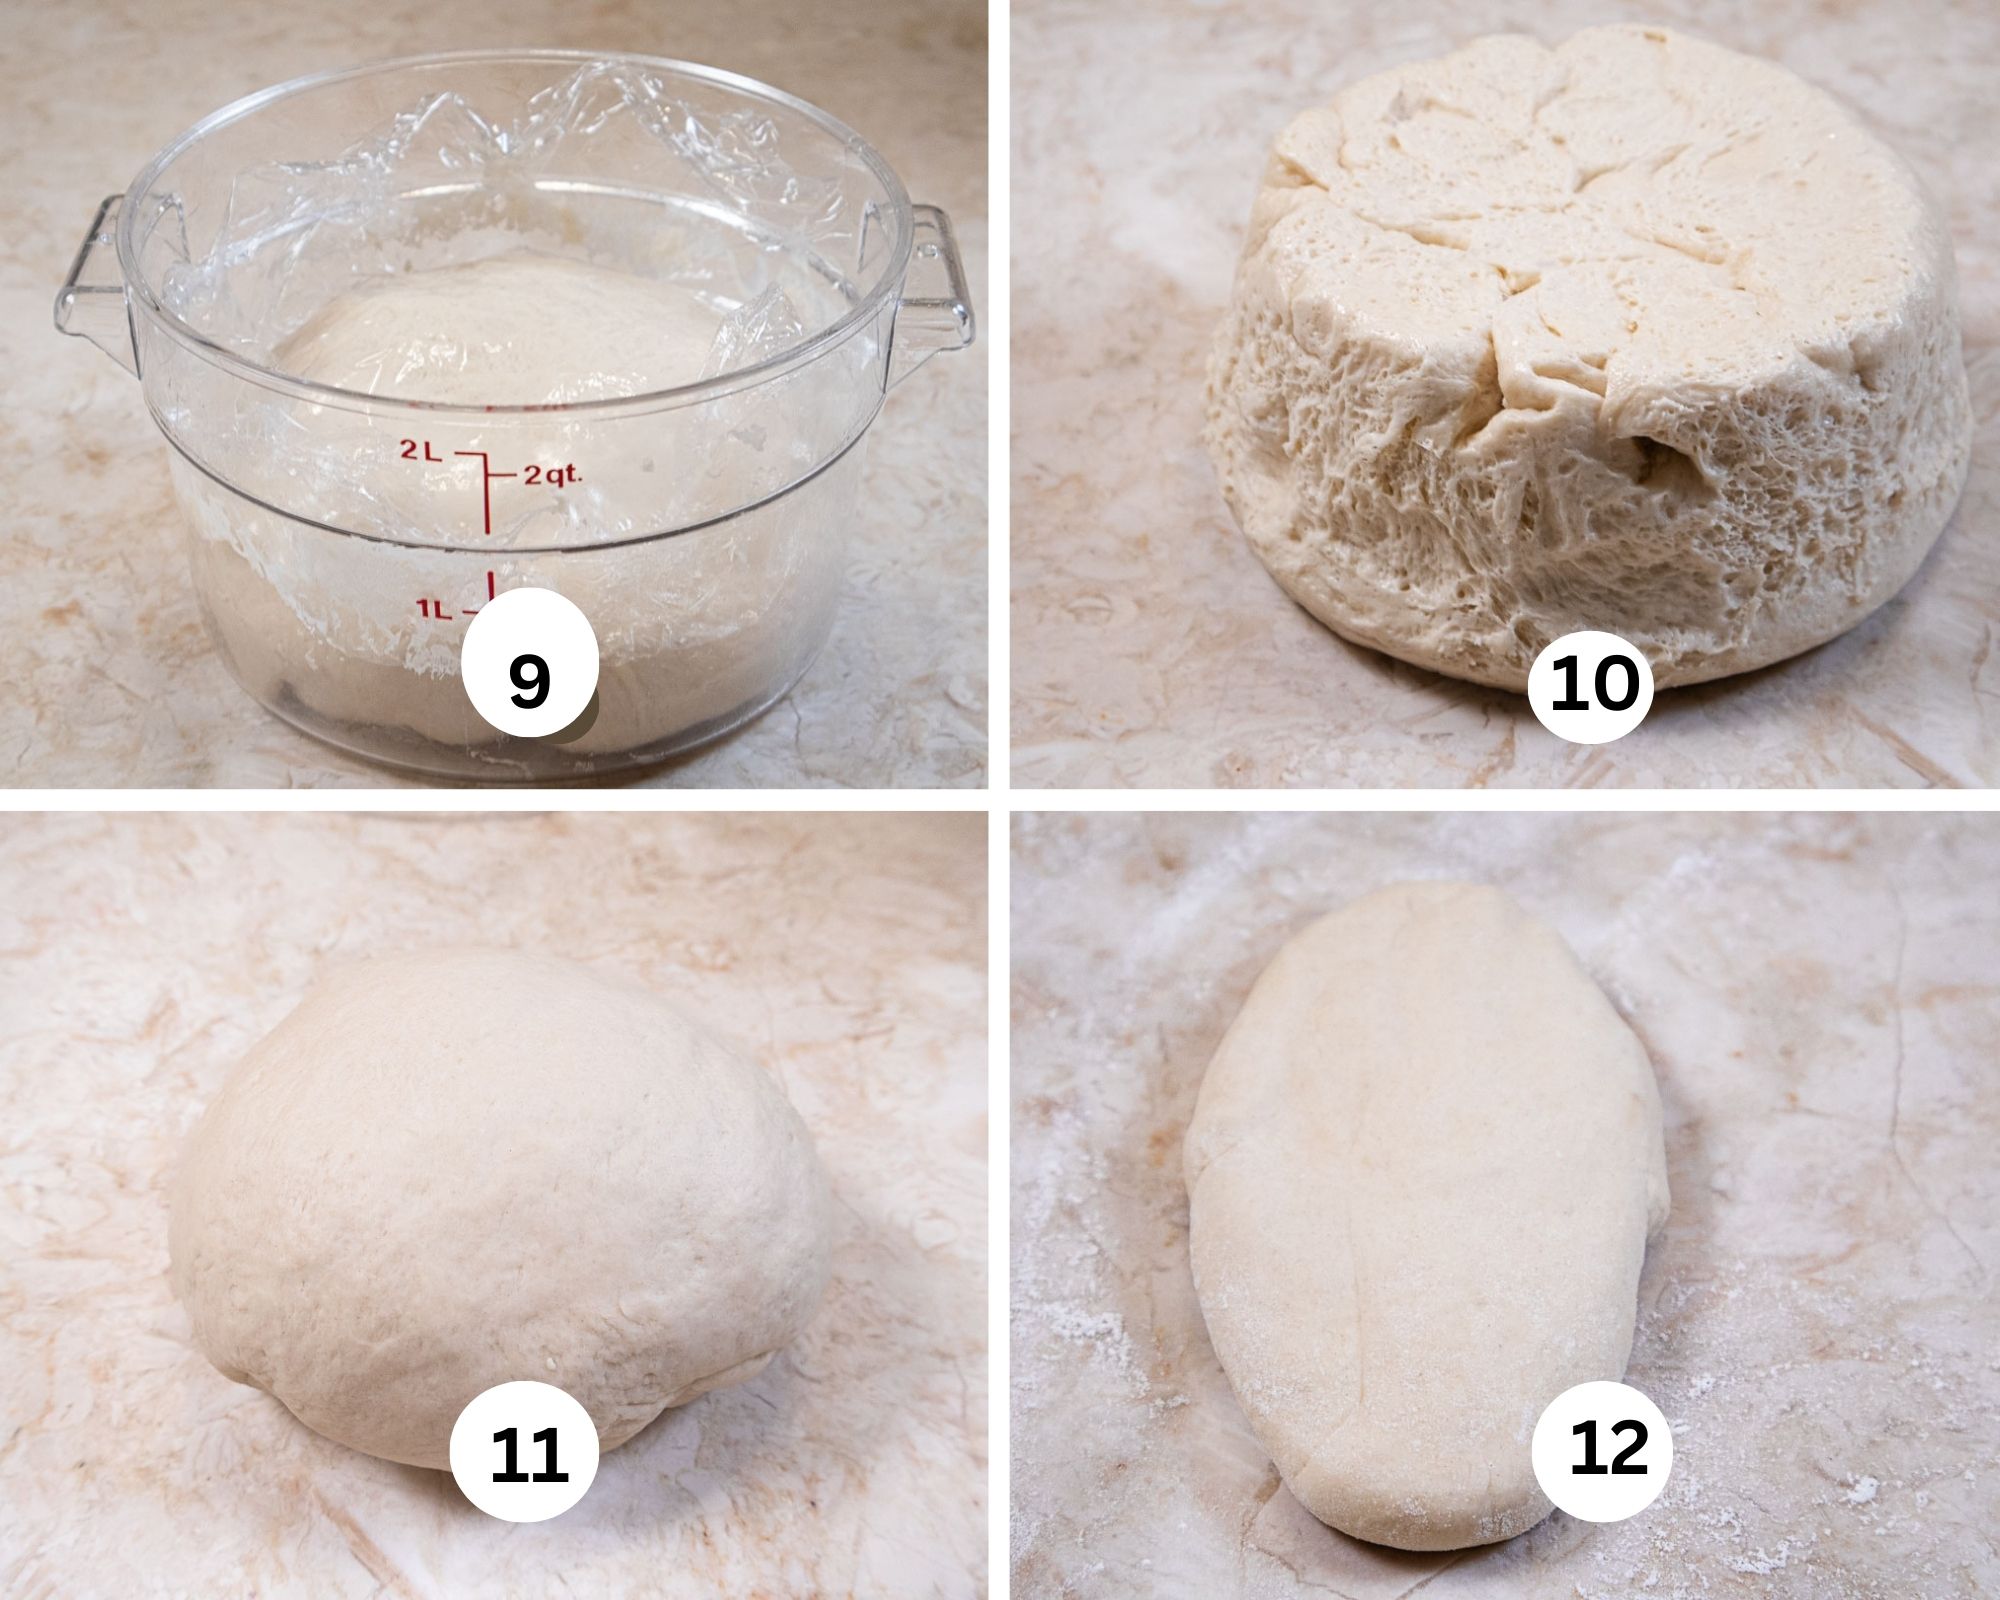 This collages shows the dough deflated, thurned out of the container, shaped into a ball and last shaped into an oval.